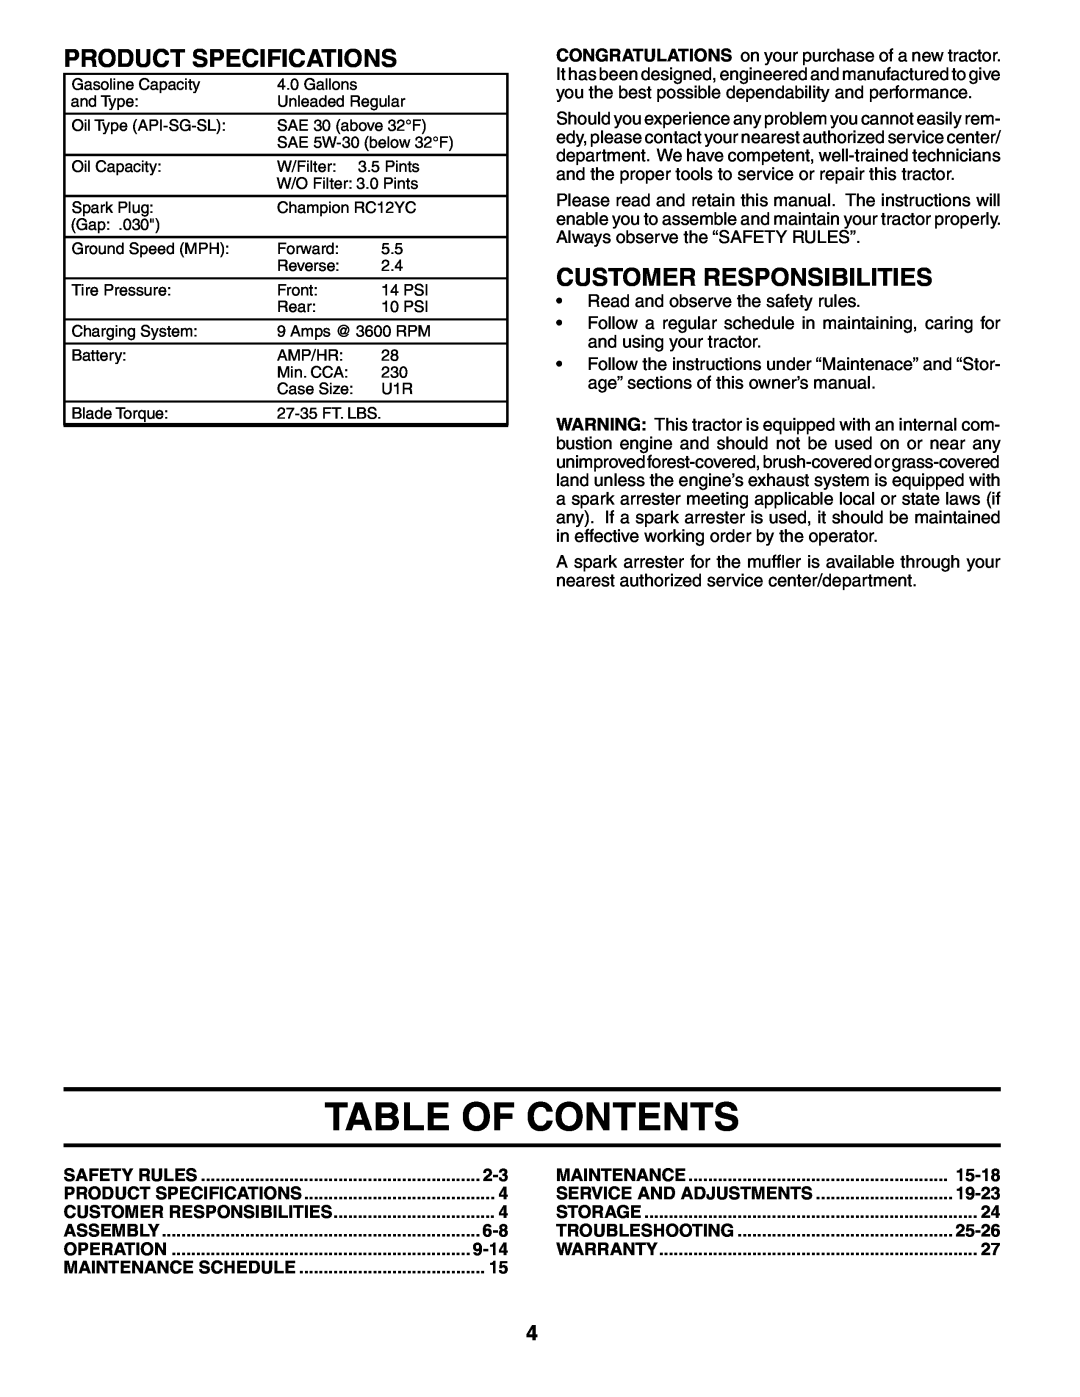 Poulan 195018 manual Table Of Contents, Product Specifications, Customer Responsibilities 